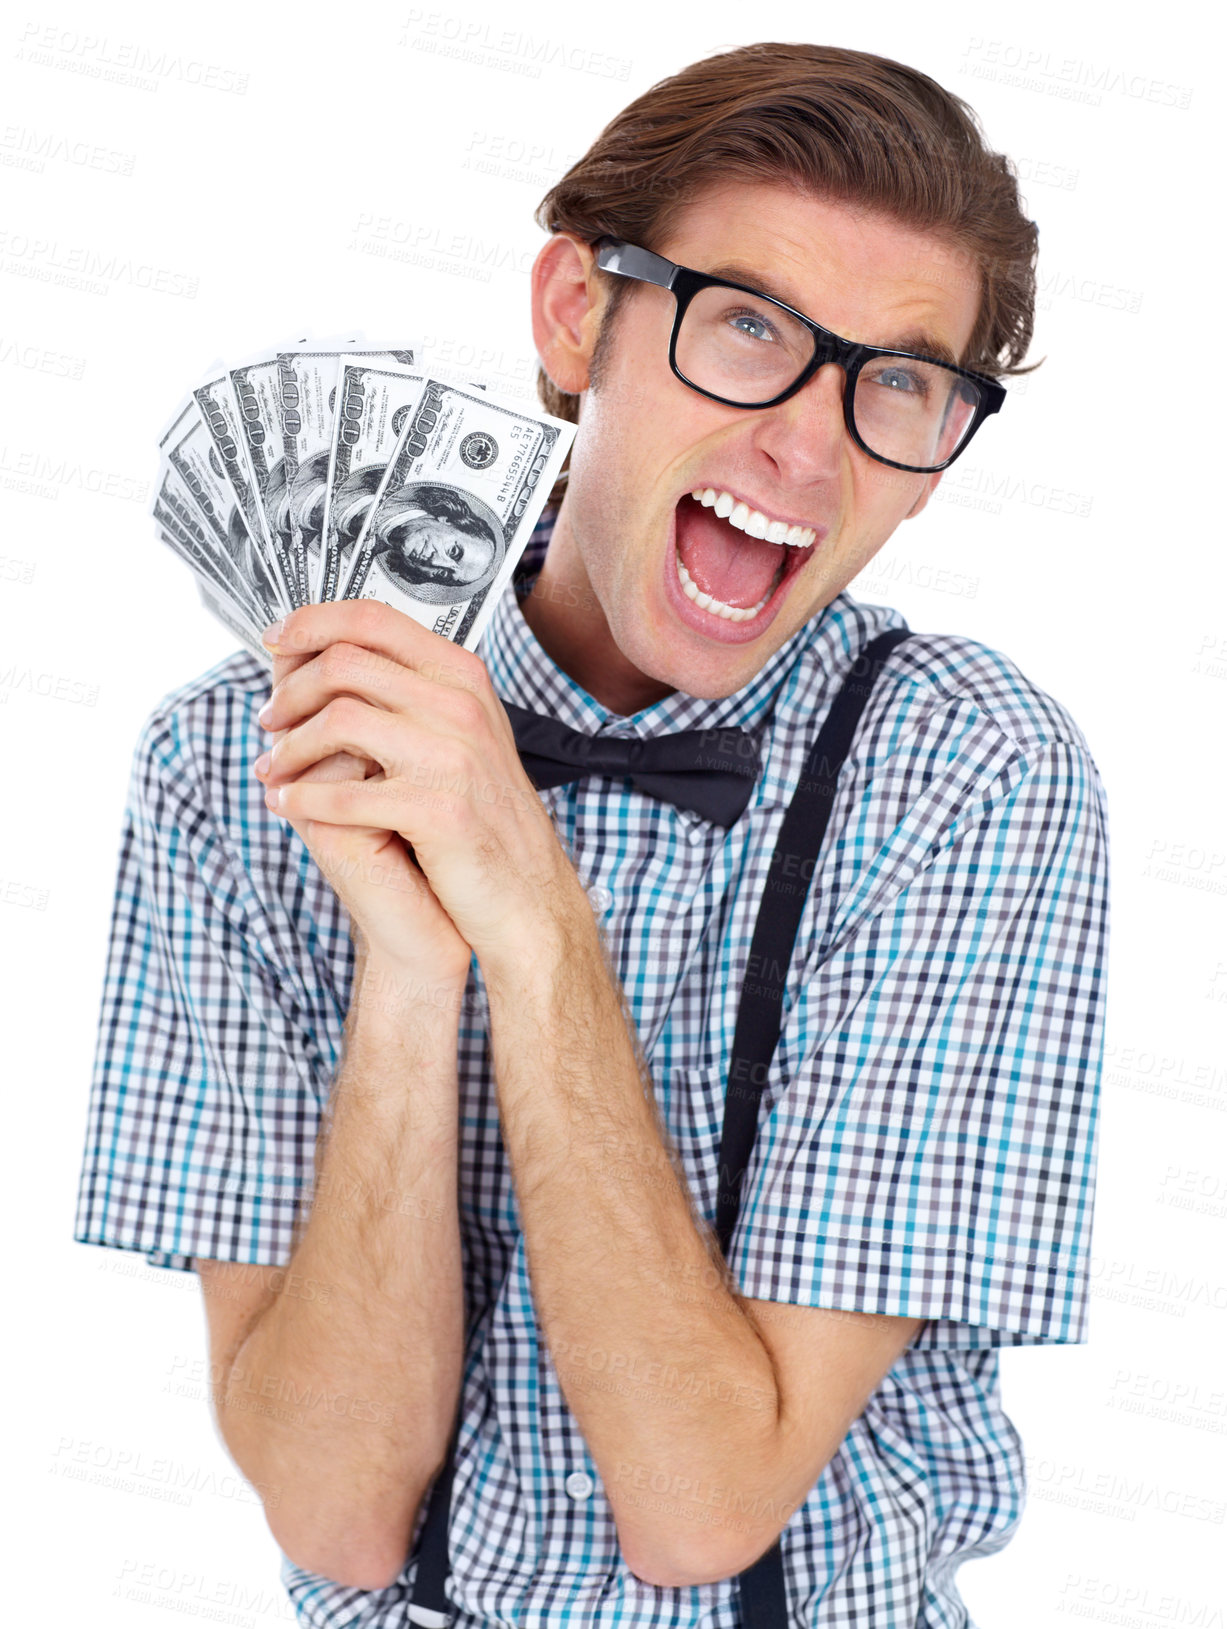 Buy stock photo Shouting, money and excited man with dollars in studio isolated on white background. Winner, scream and funny person with cash from lottery, competition or bonus prize, cashback or financial freedom.